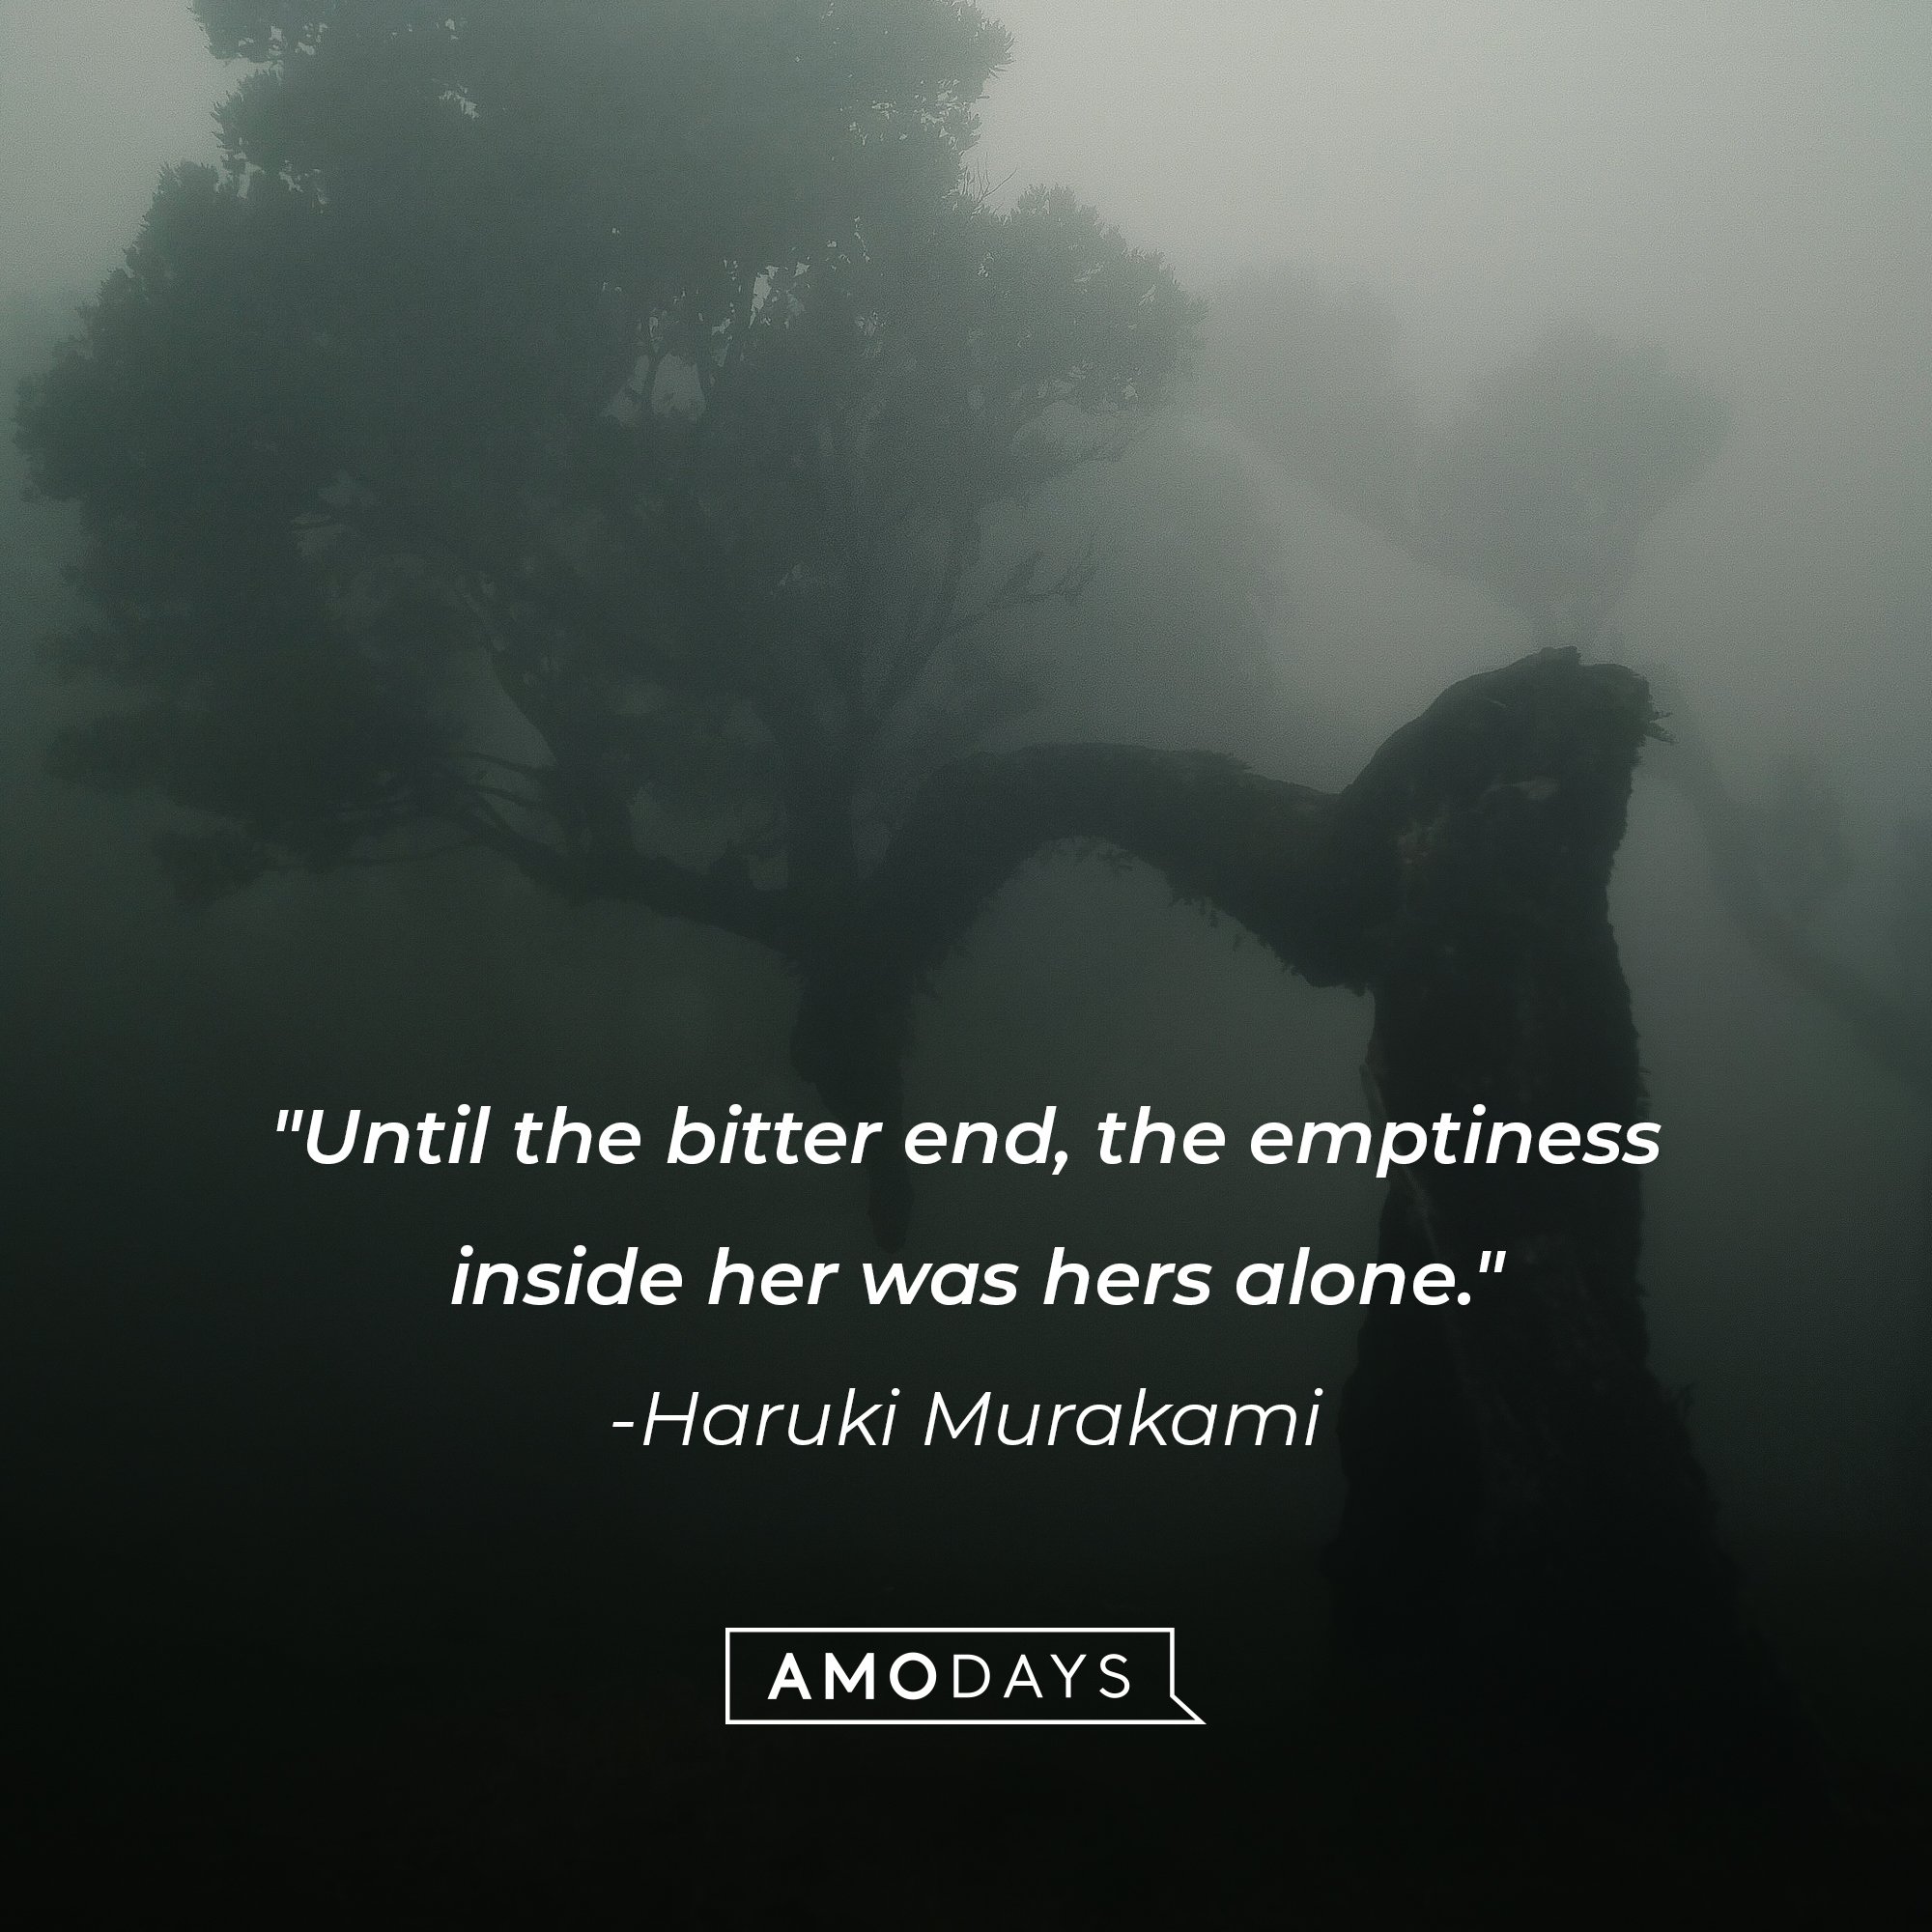 Haruki Murakami’s quote: "Until the bitter end, the emptiness inside her was hers alone." | Image: AmoDays 